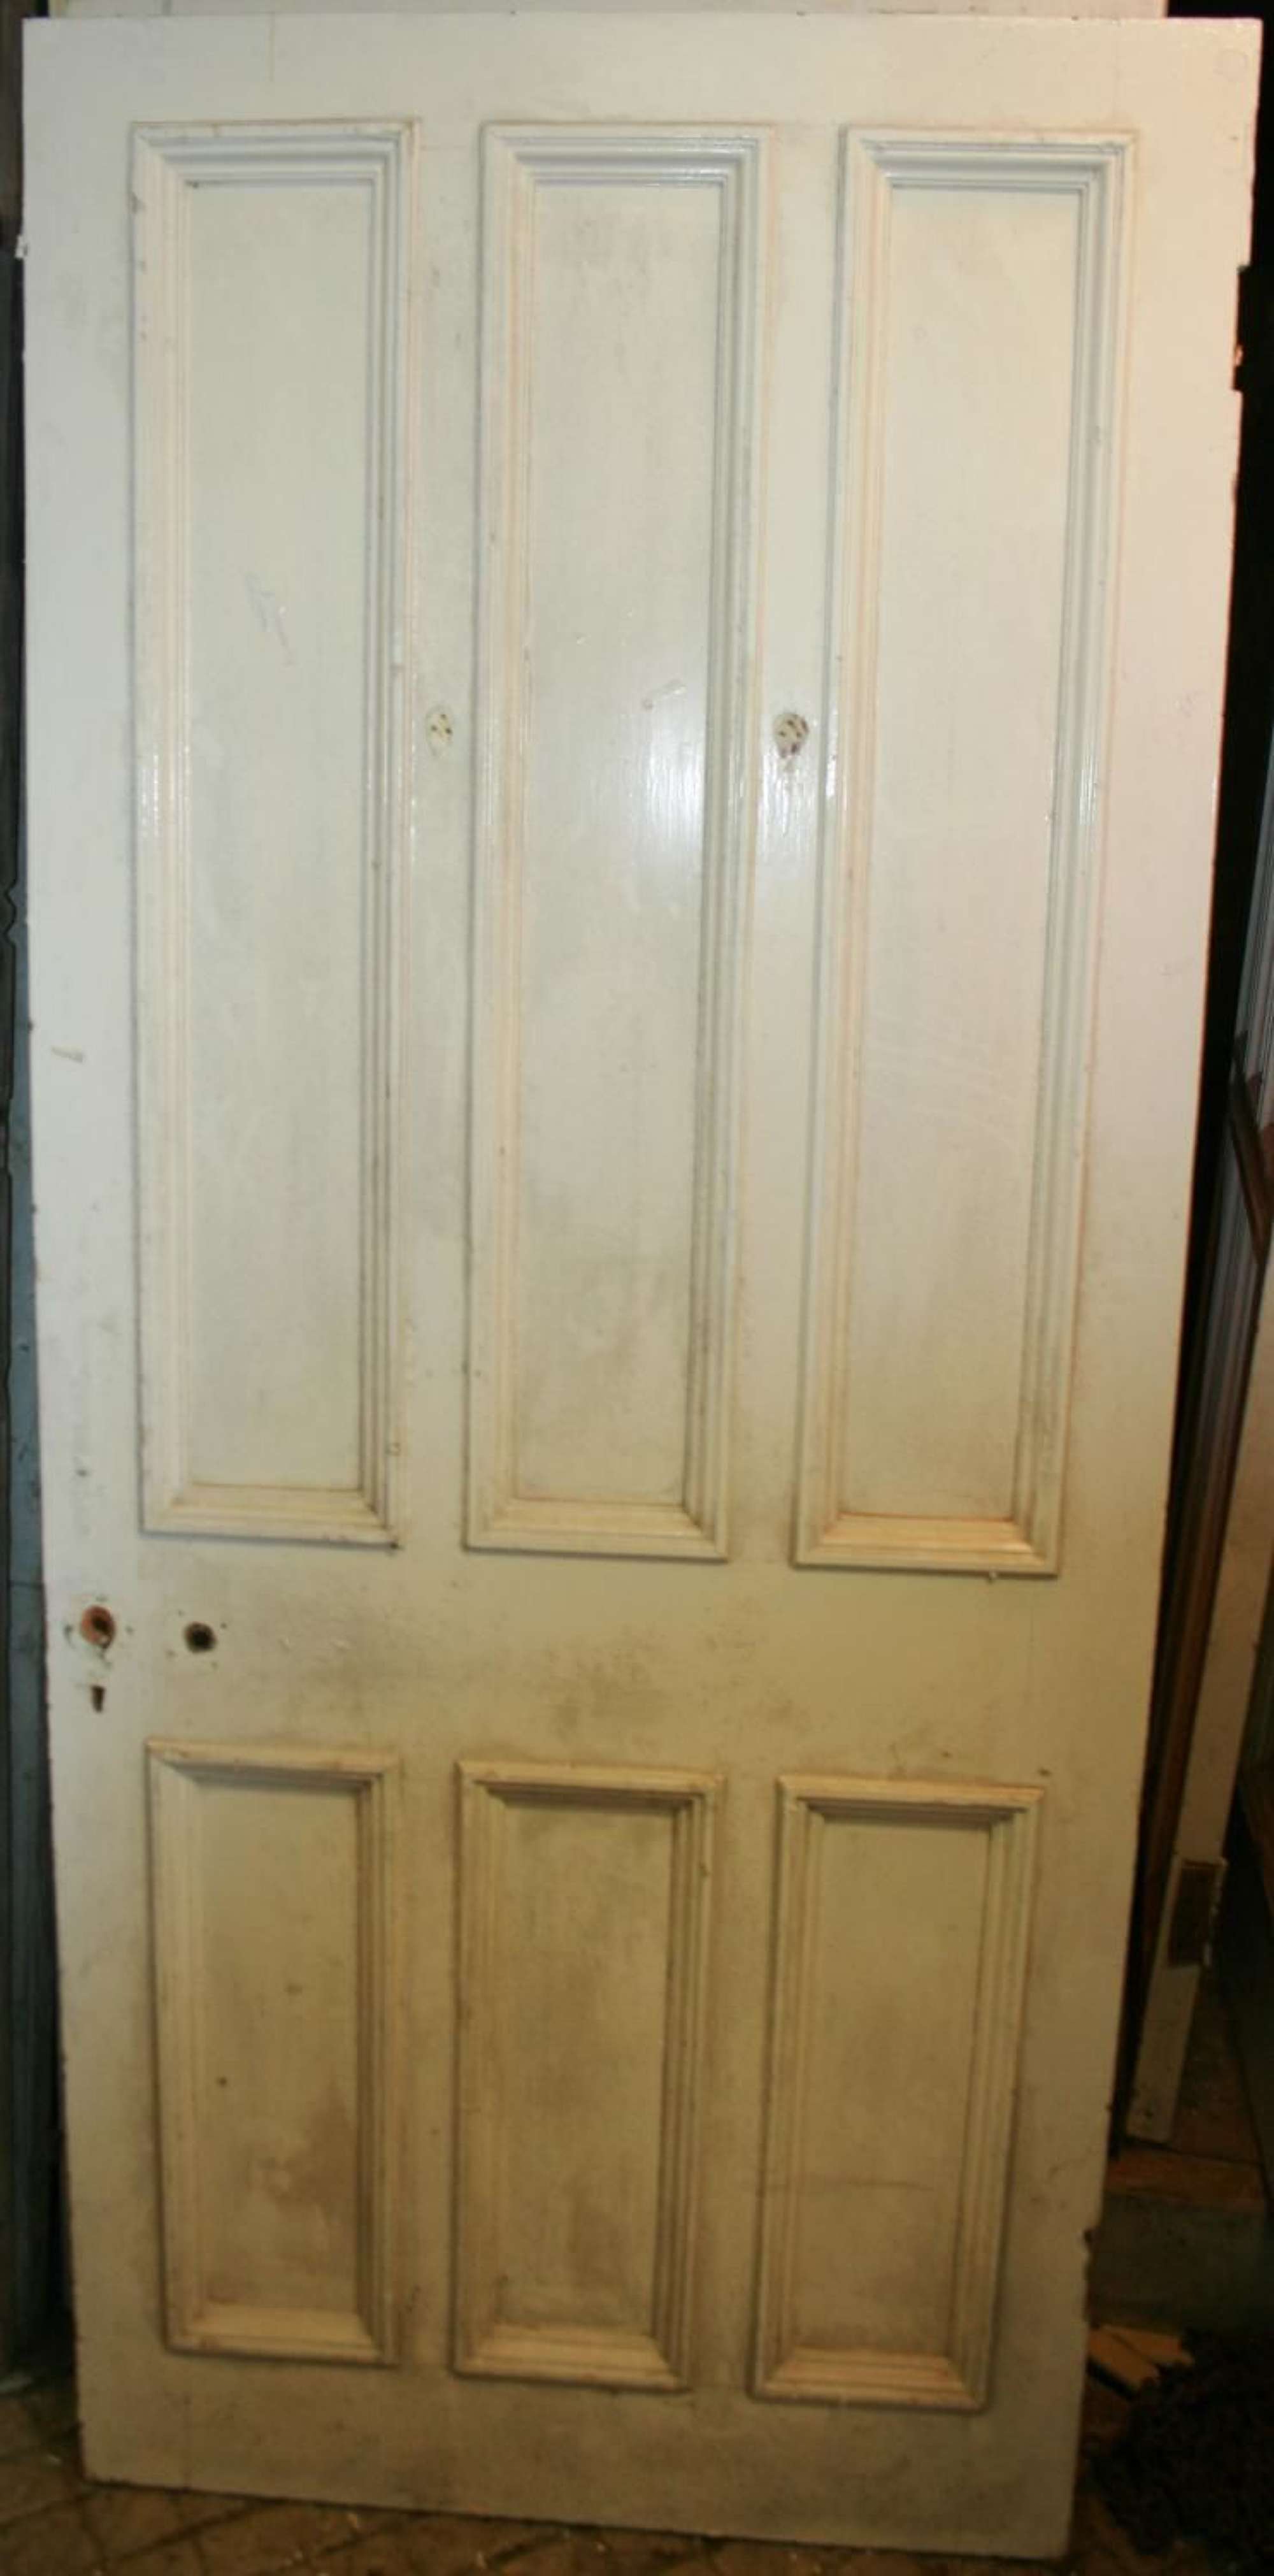 DB0629 A Late Victorian 6 Panelled Pine Door with Bolection Mouldings